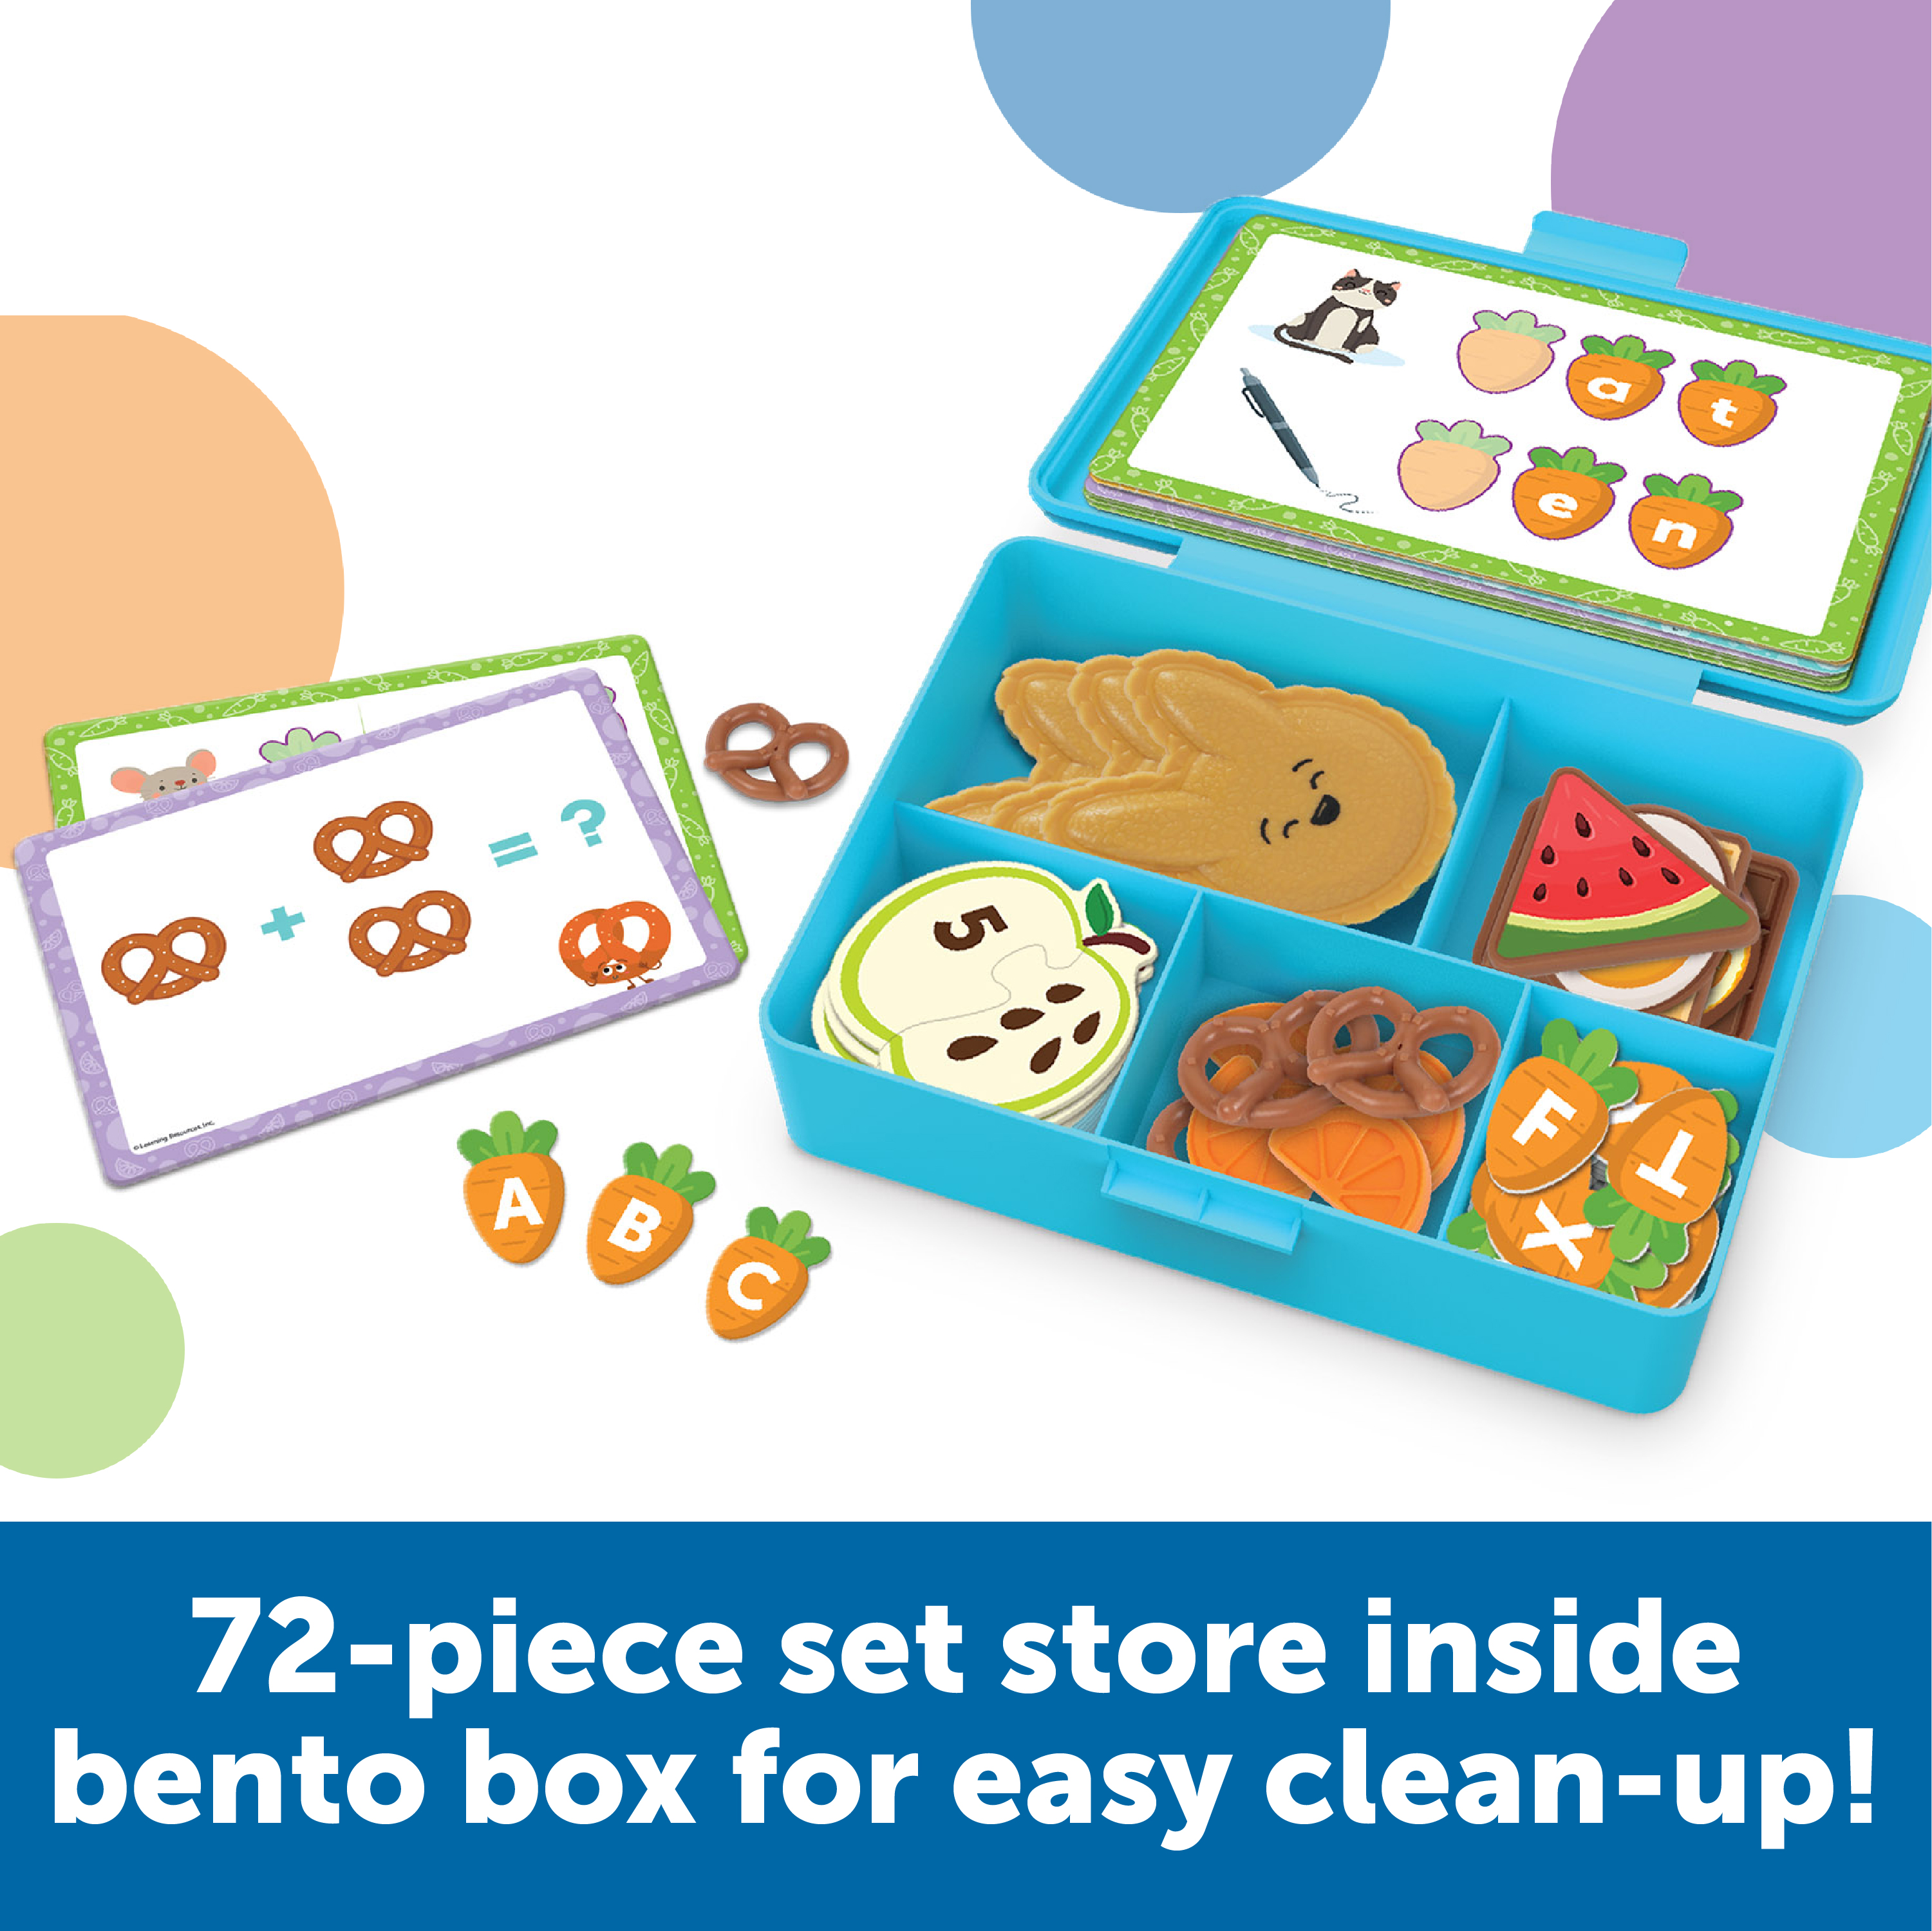 Learning Resources Let's Go Bento! Learning Activity Set - 78 pieces, Bento Box Toy for Boys and Girls Ages 18+ months - image 2 of 8